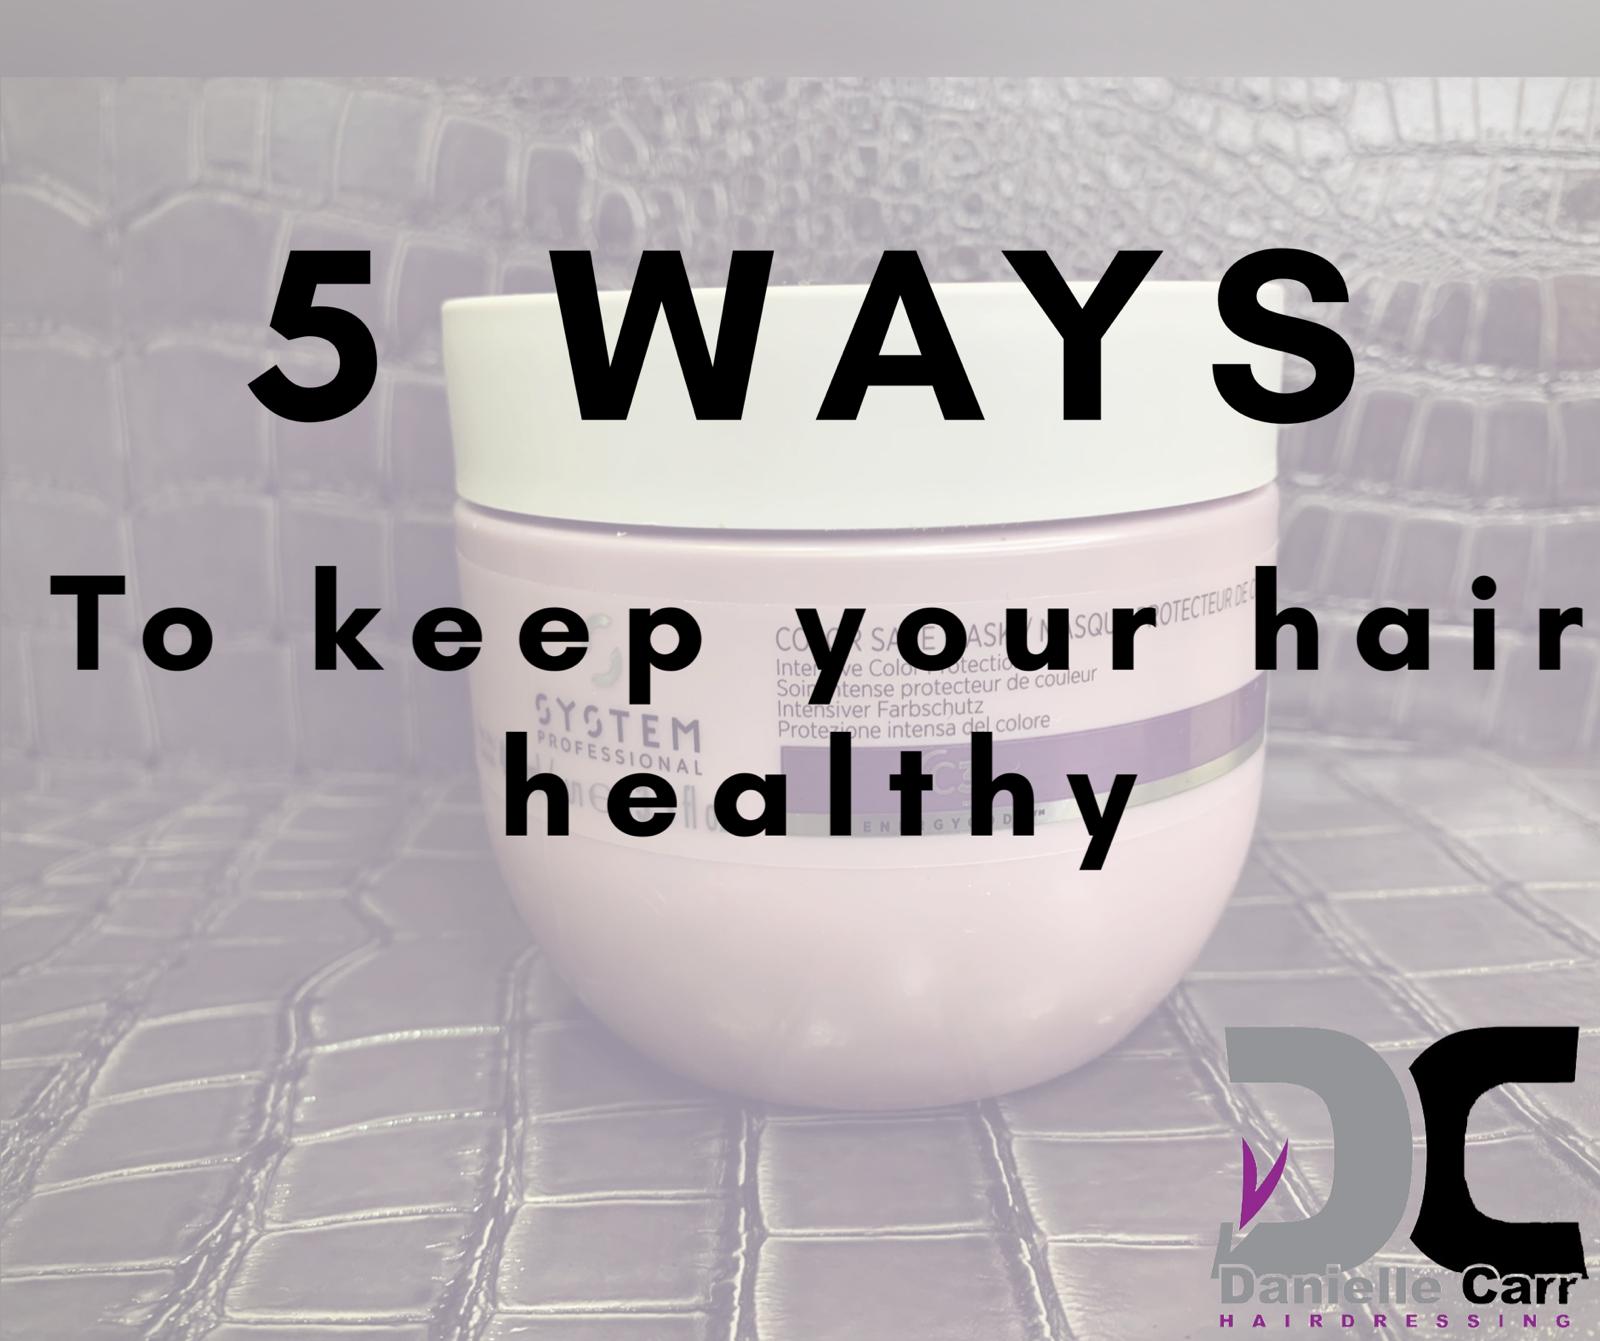 Keeping your hair healthy at home